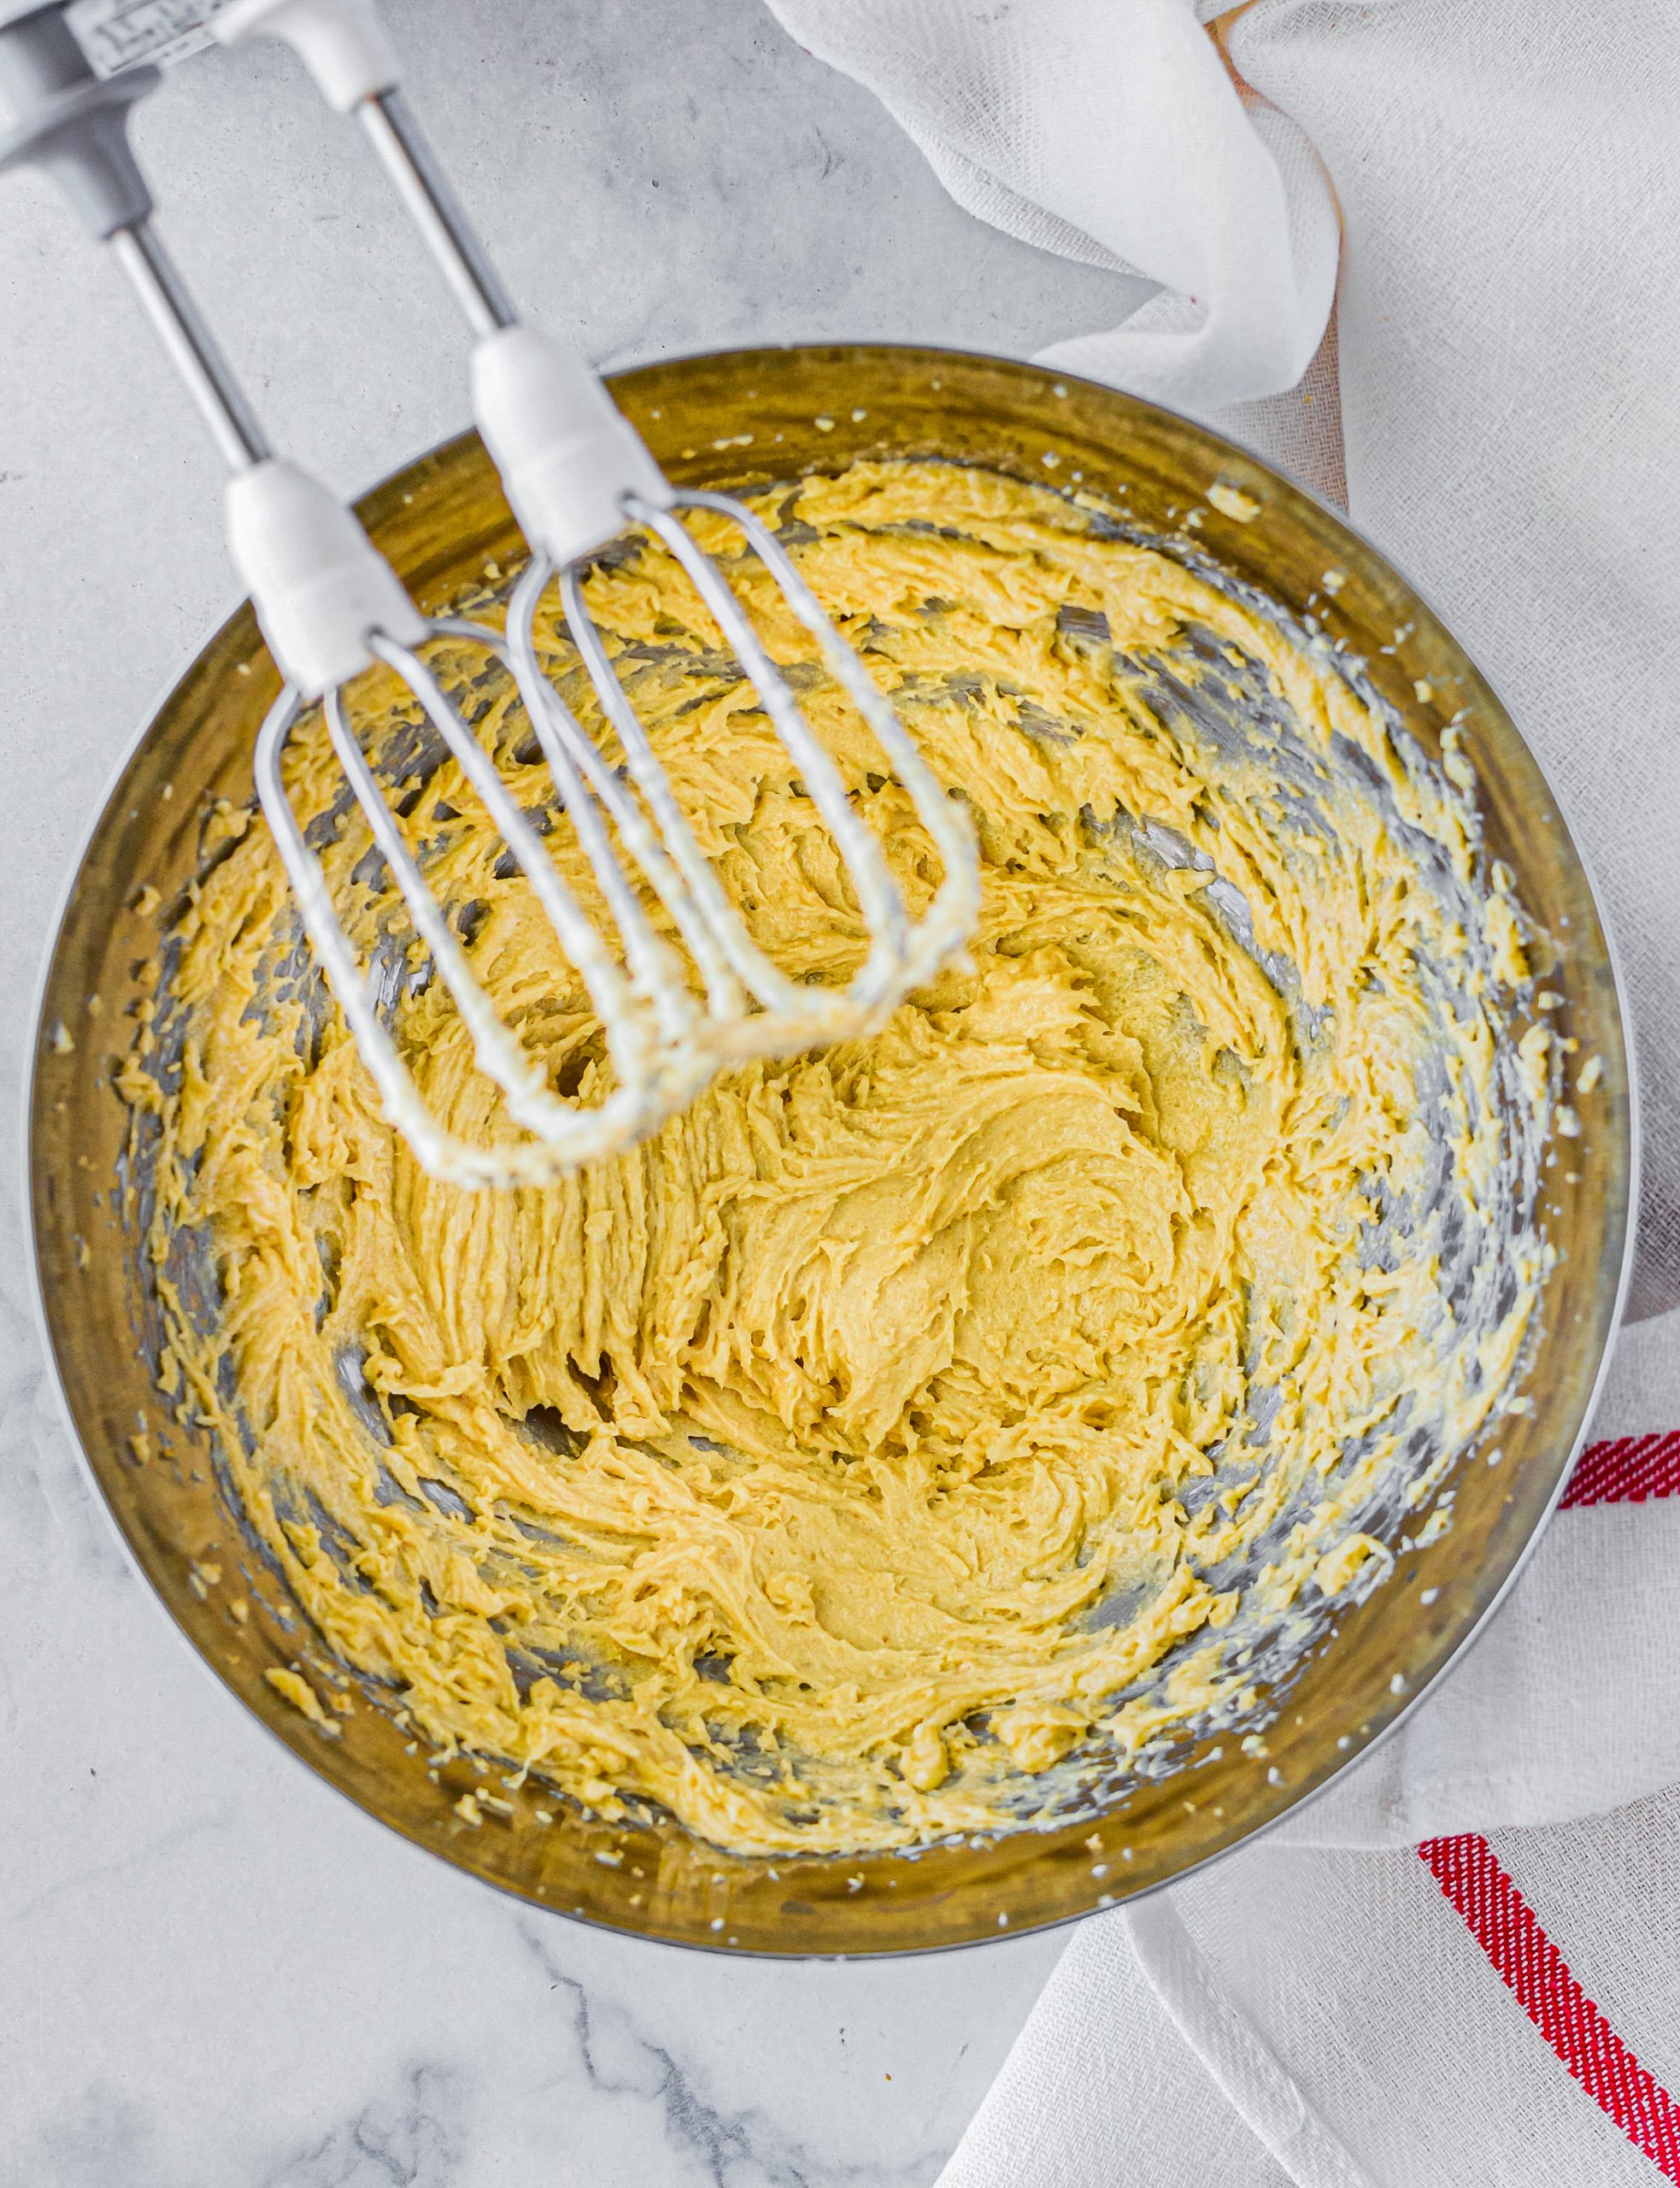 In a separate bowl, blend together the butter and sugar until creamy. 